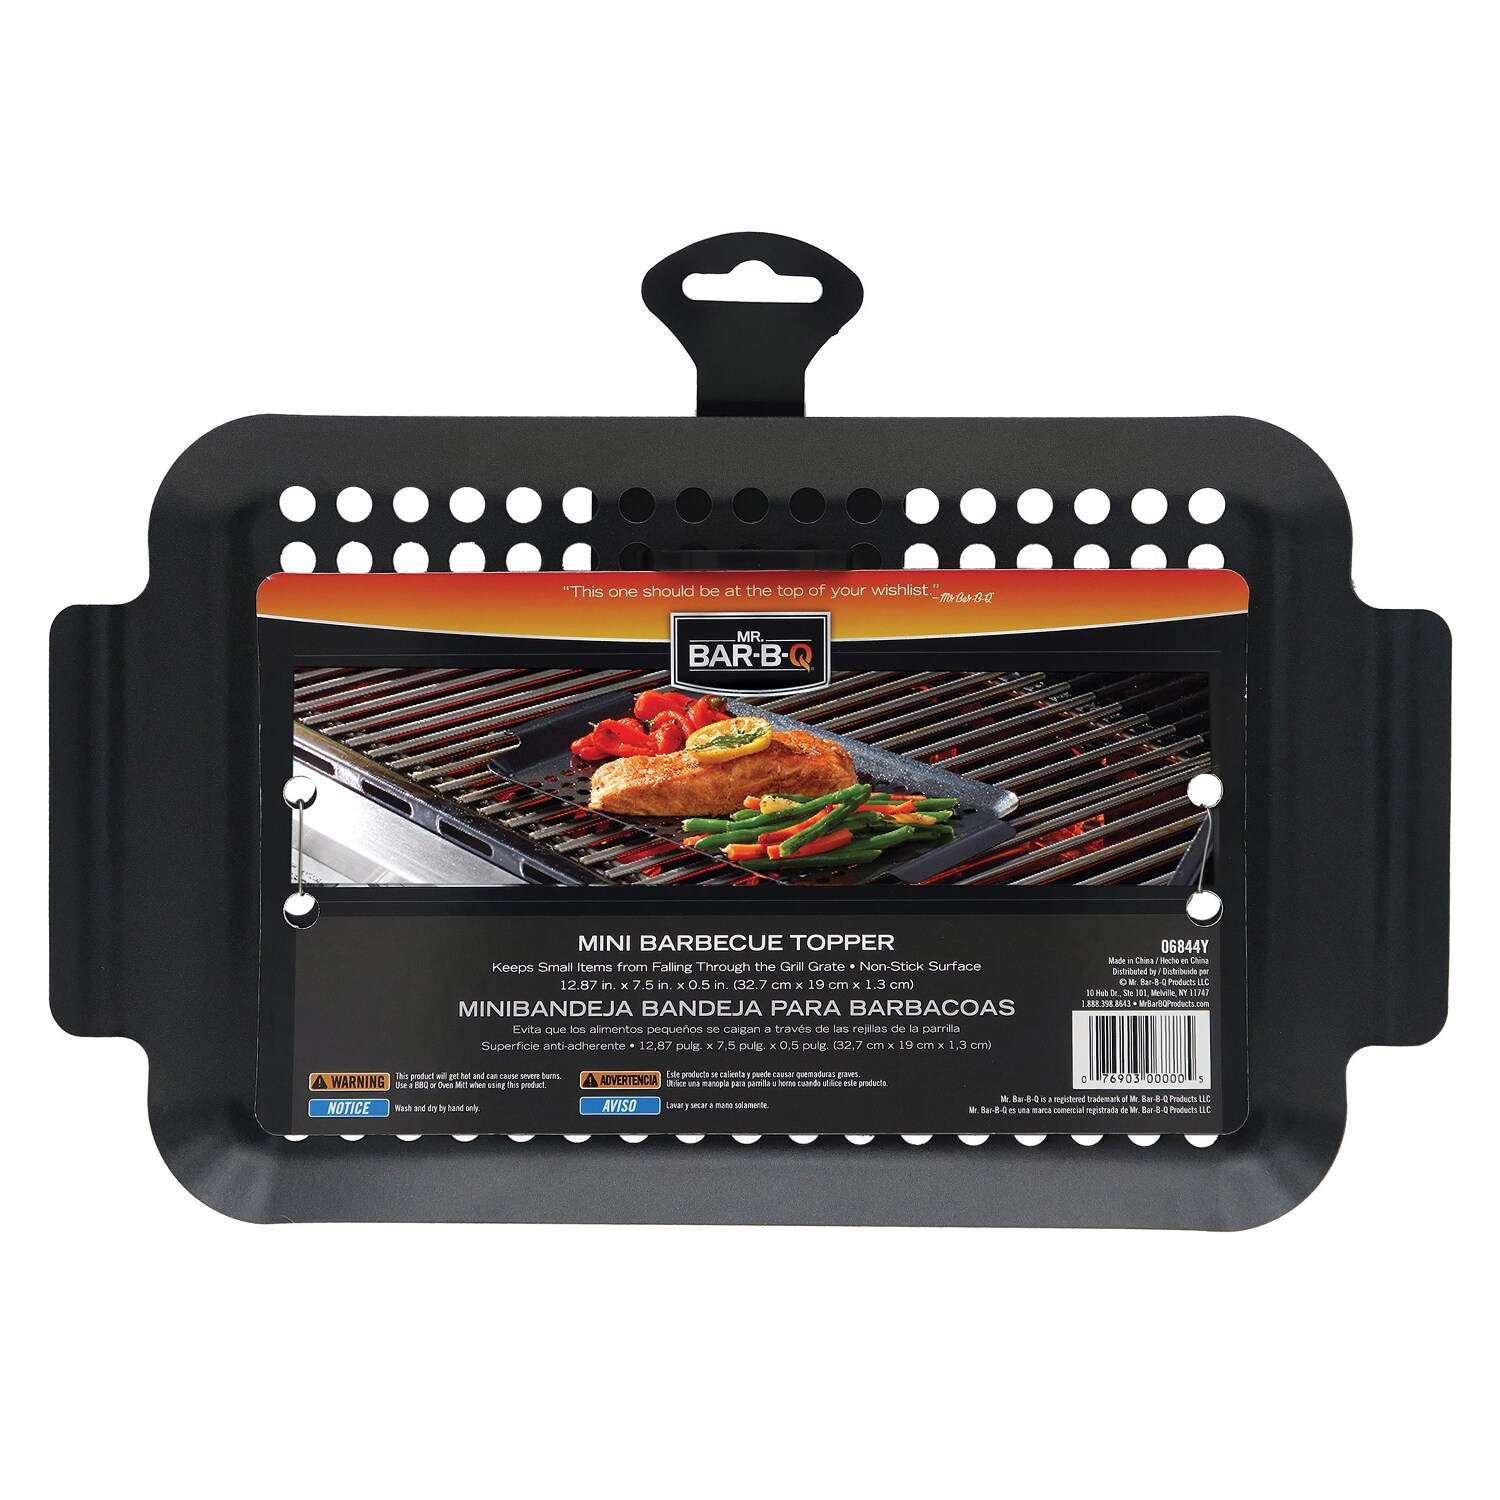 Mr. BBQ Stainless Steel Skillet with Removable Heat Resistant Handle -  Perfect for Cooking Vegetables, Stir Fry, Seafood and More - Great for